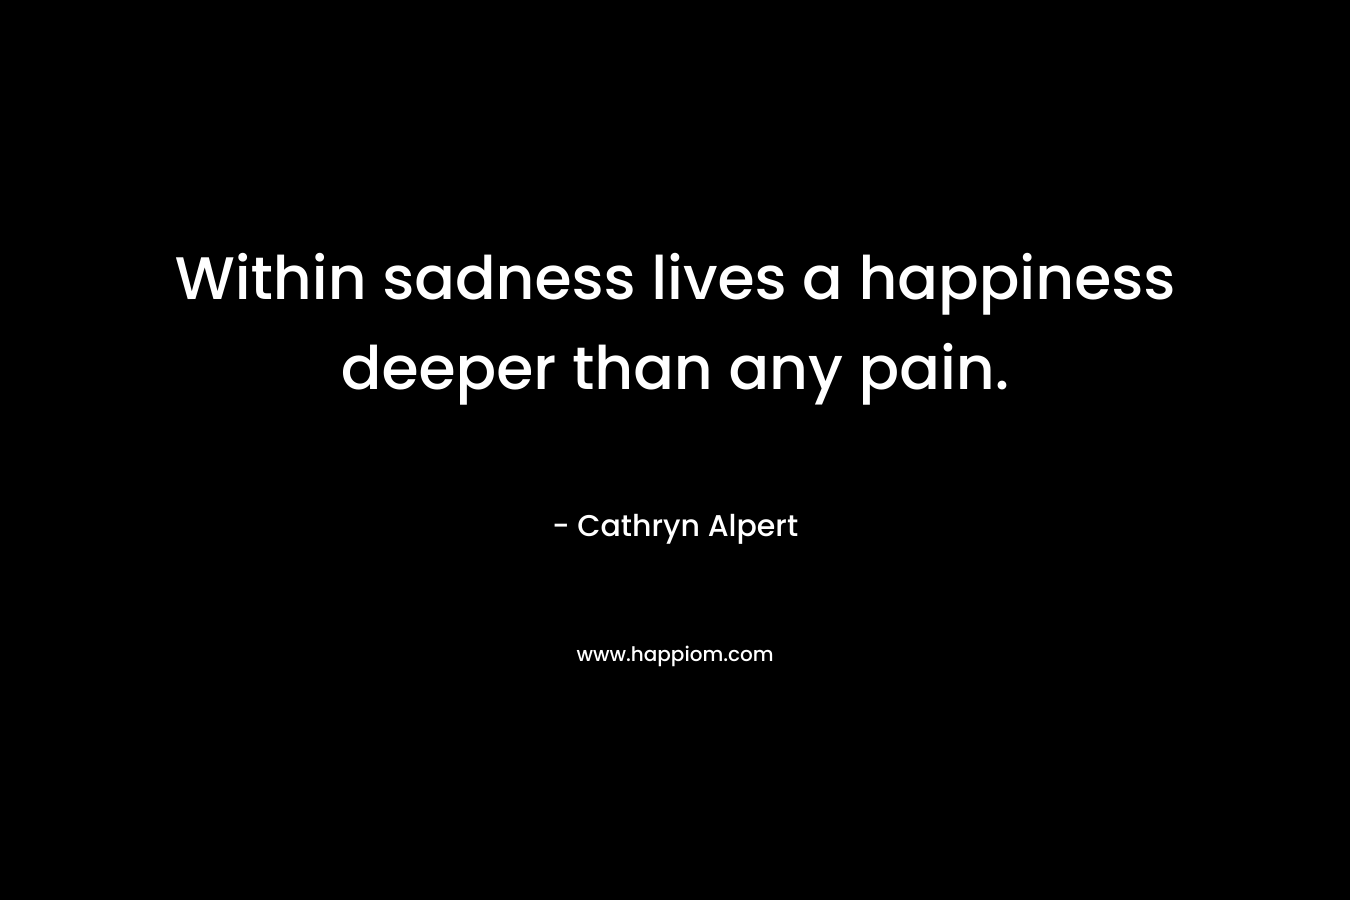 Within sadness lives a happiness deeper than any pain.